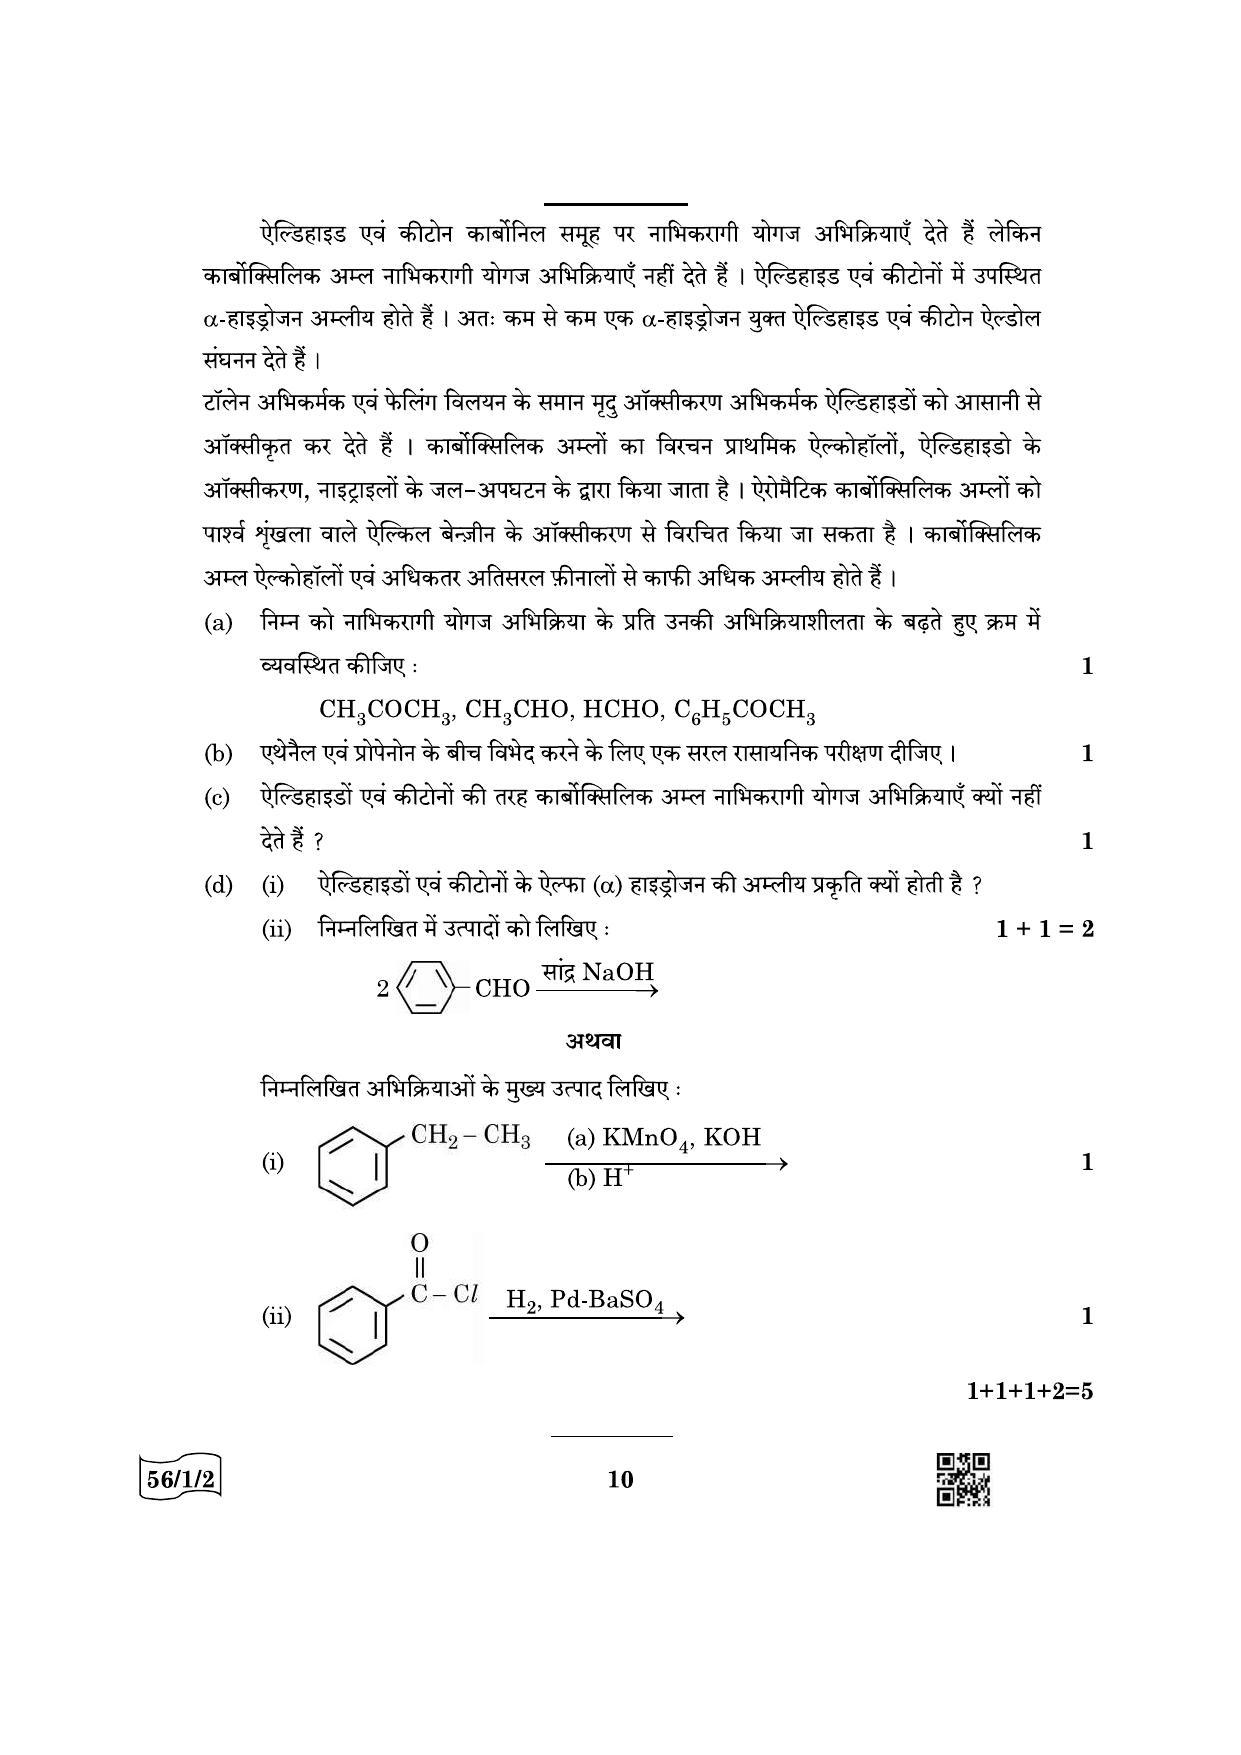 CBSE Class 12 56-1-2 Chemistry 2022 Question Paper - Page 10